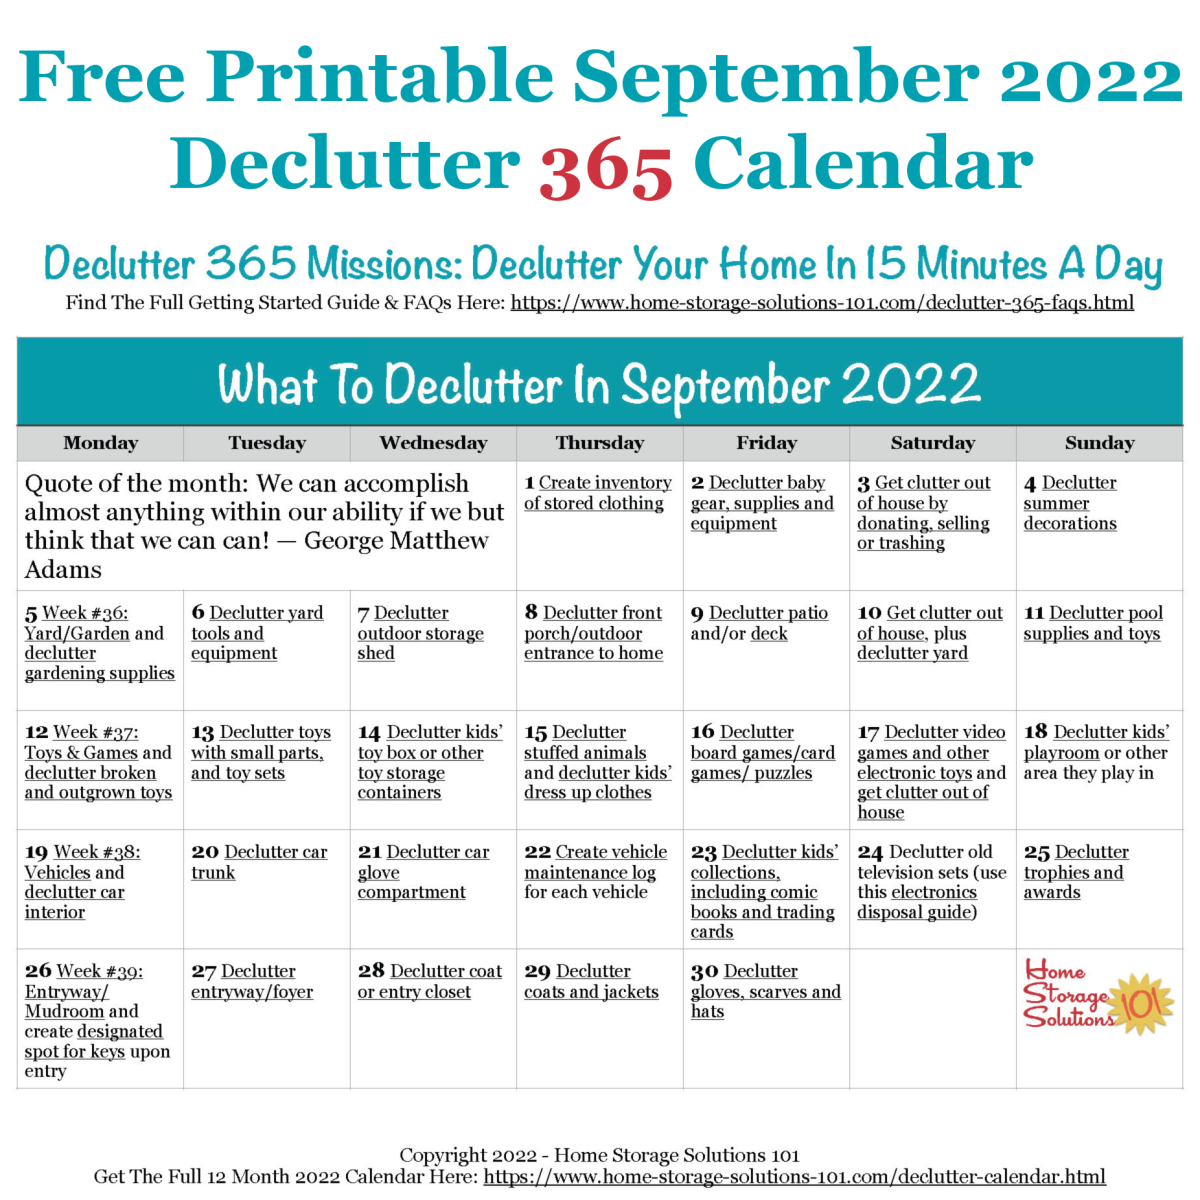 Free printable September 2022 #decluttering calendar with daily 15 minute missions. Follow the entire #Declutter365 plan provided by Home Storage Solutions 101 to #declutter your whole house in a year.